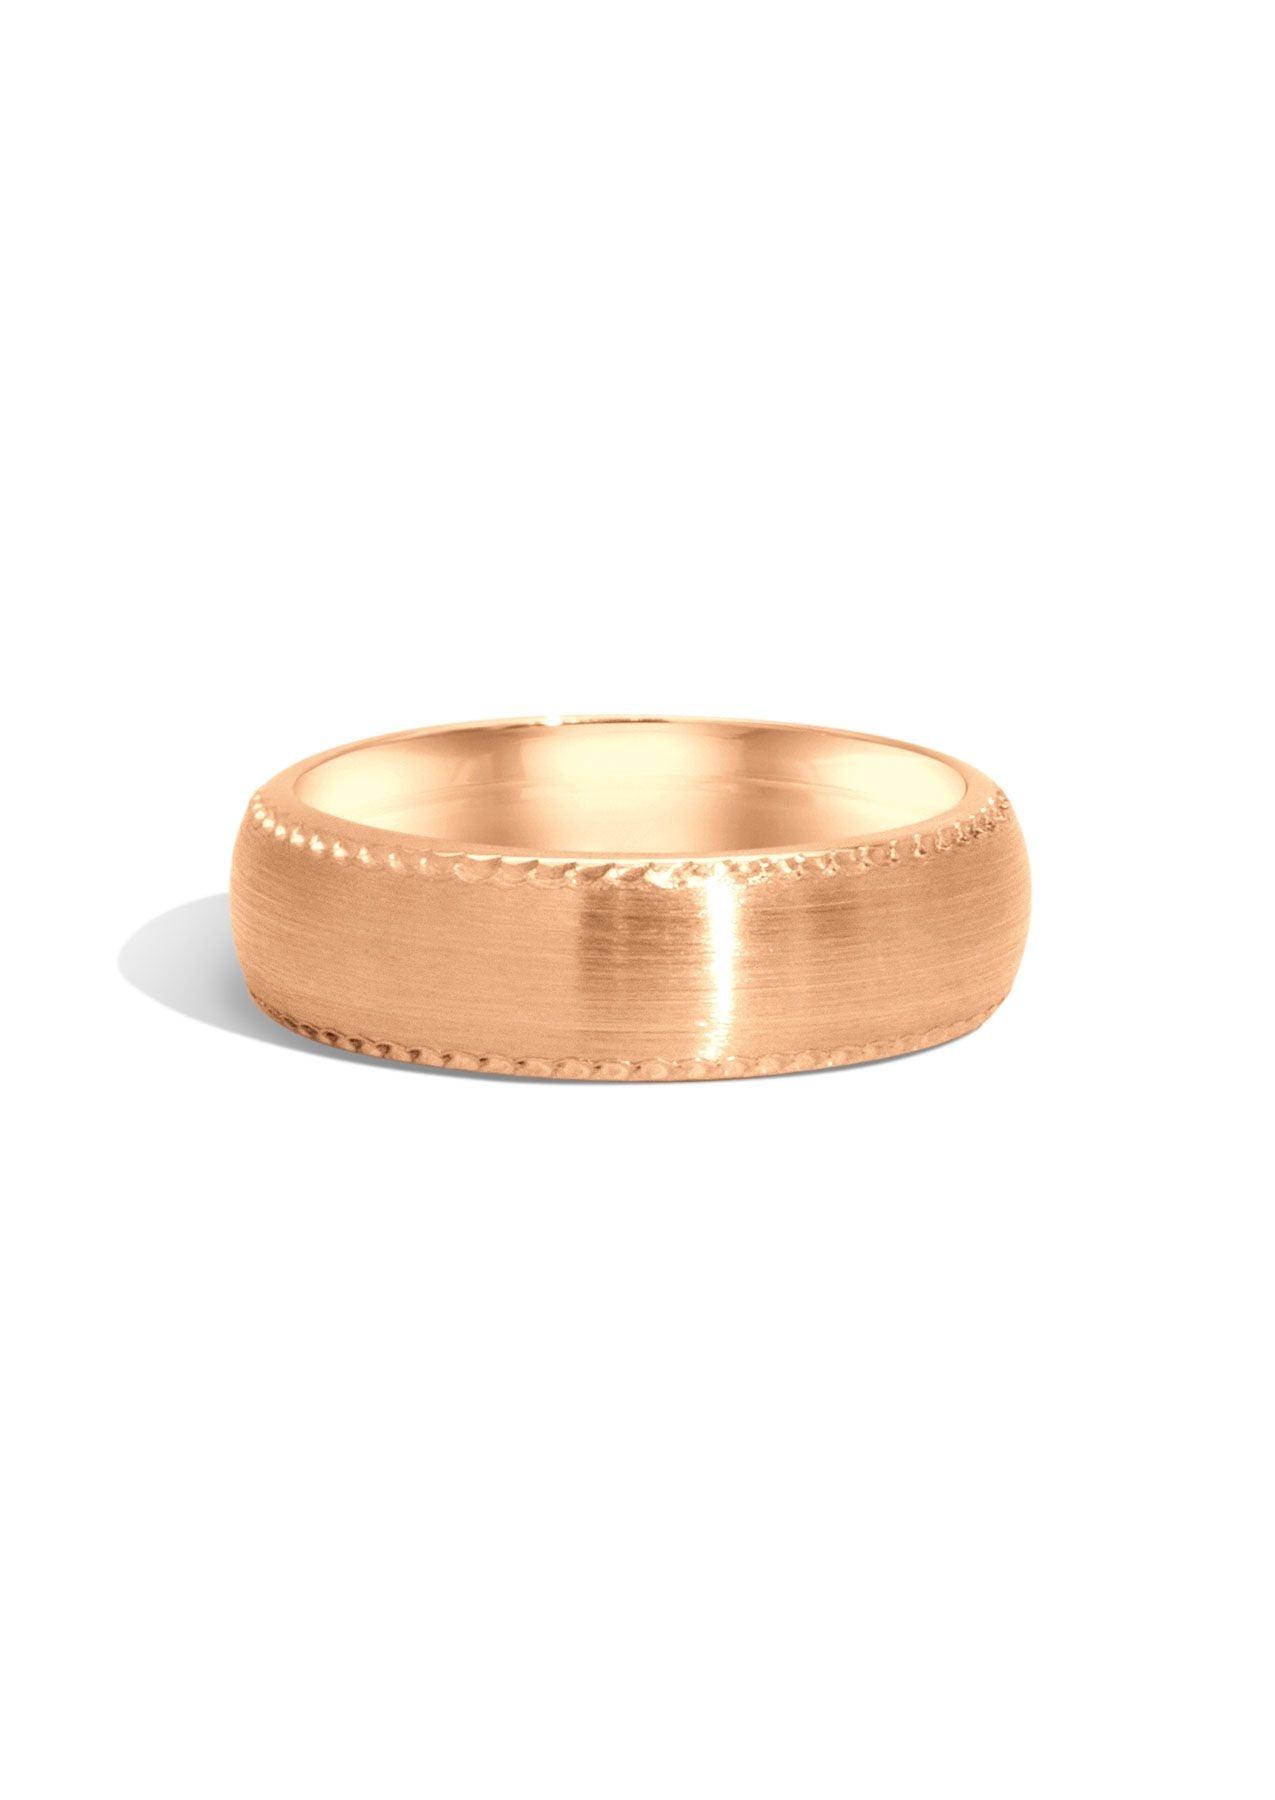 The Plume Rose Gold Band